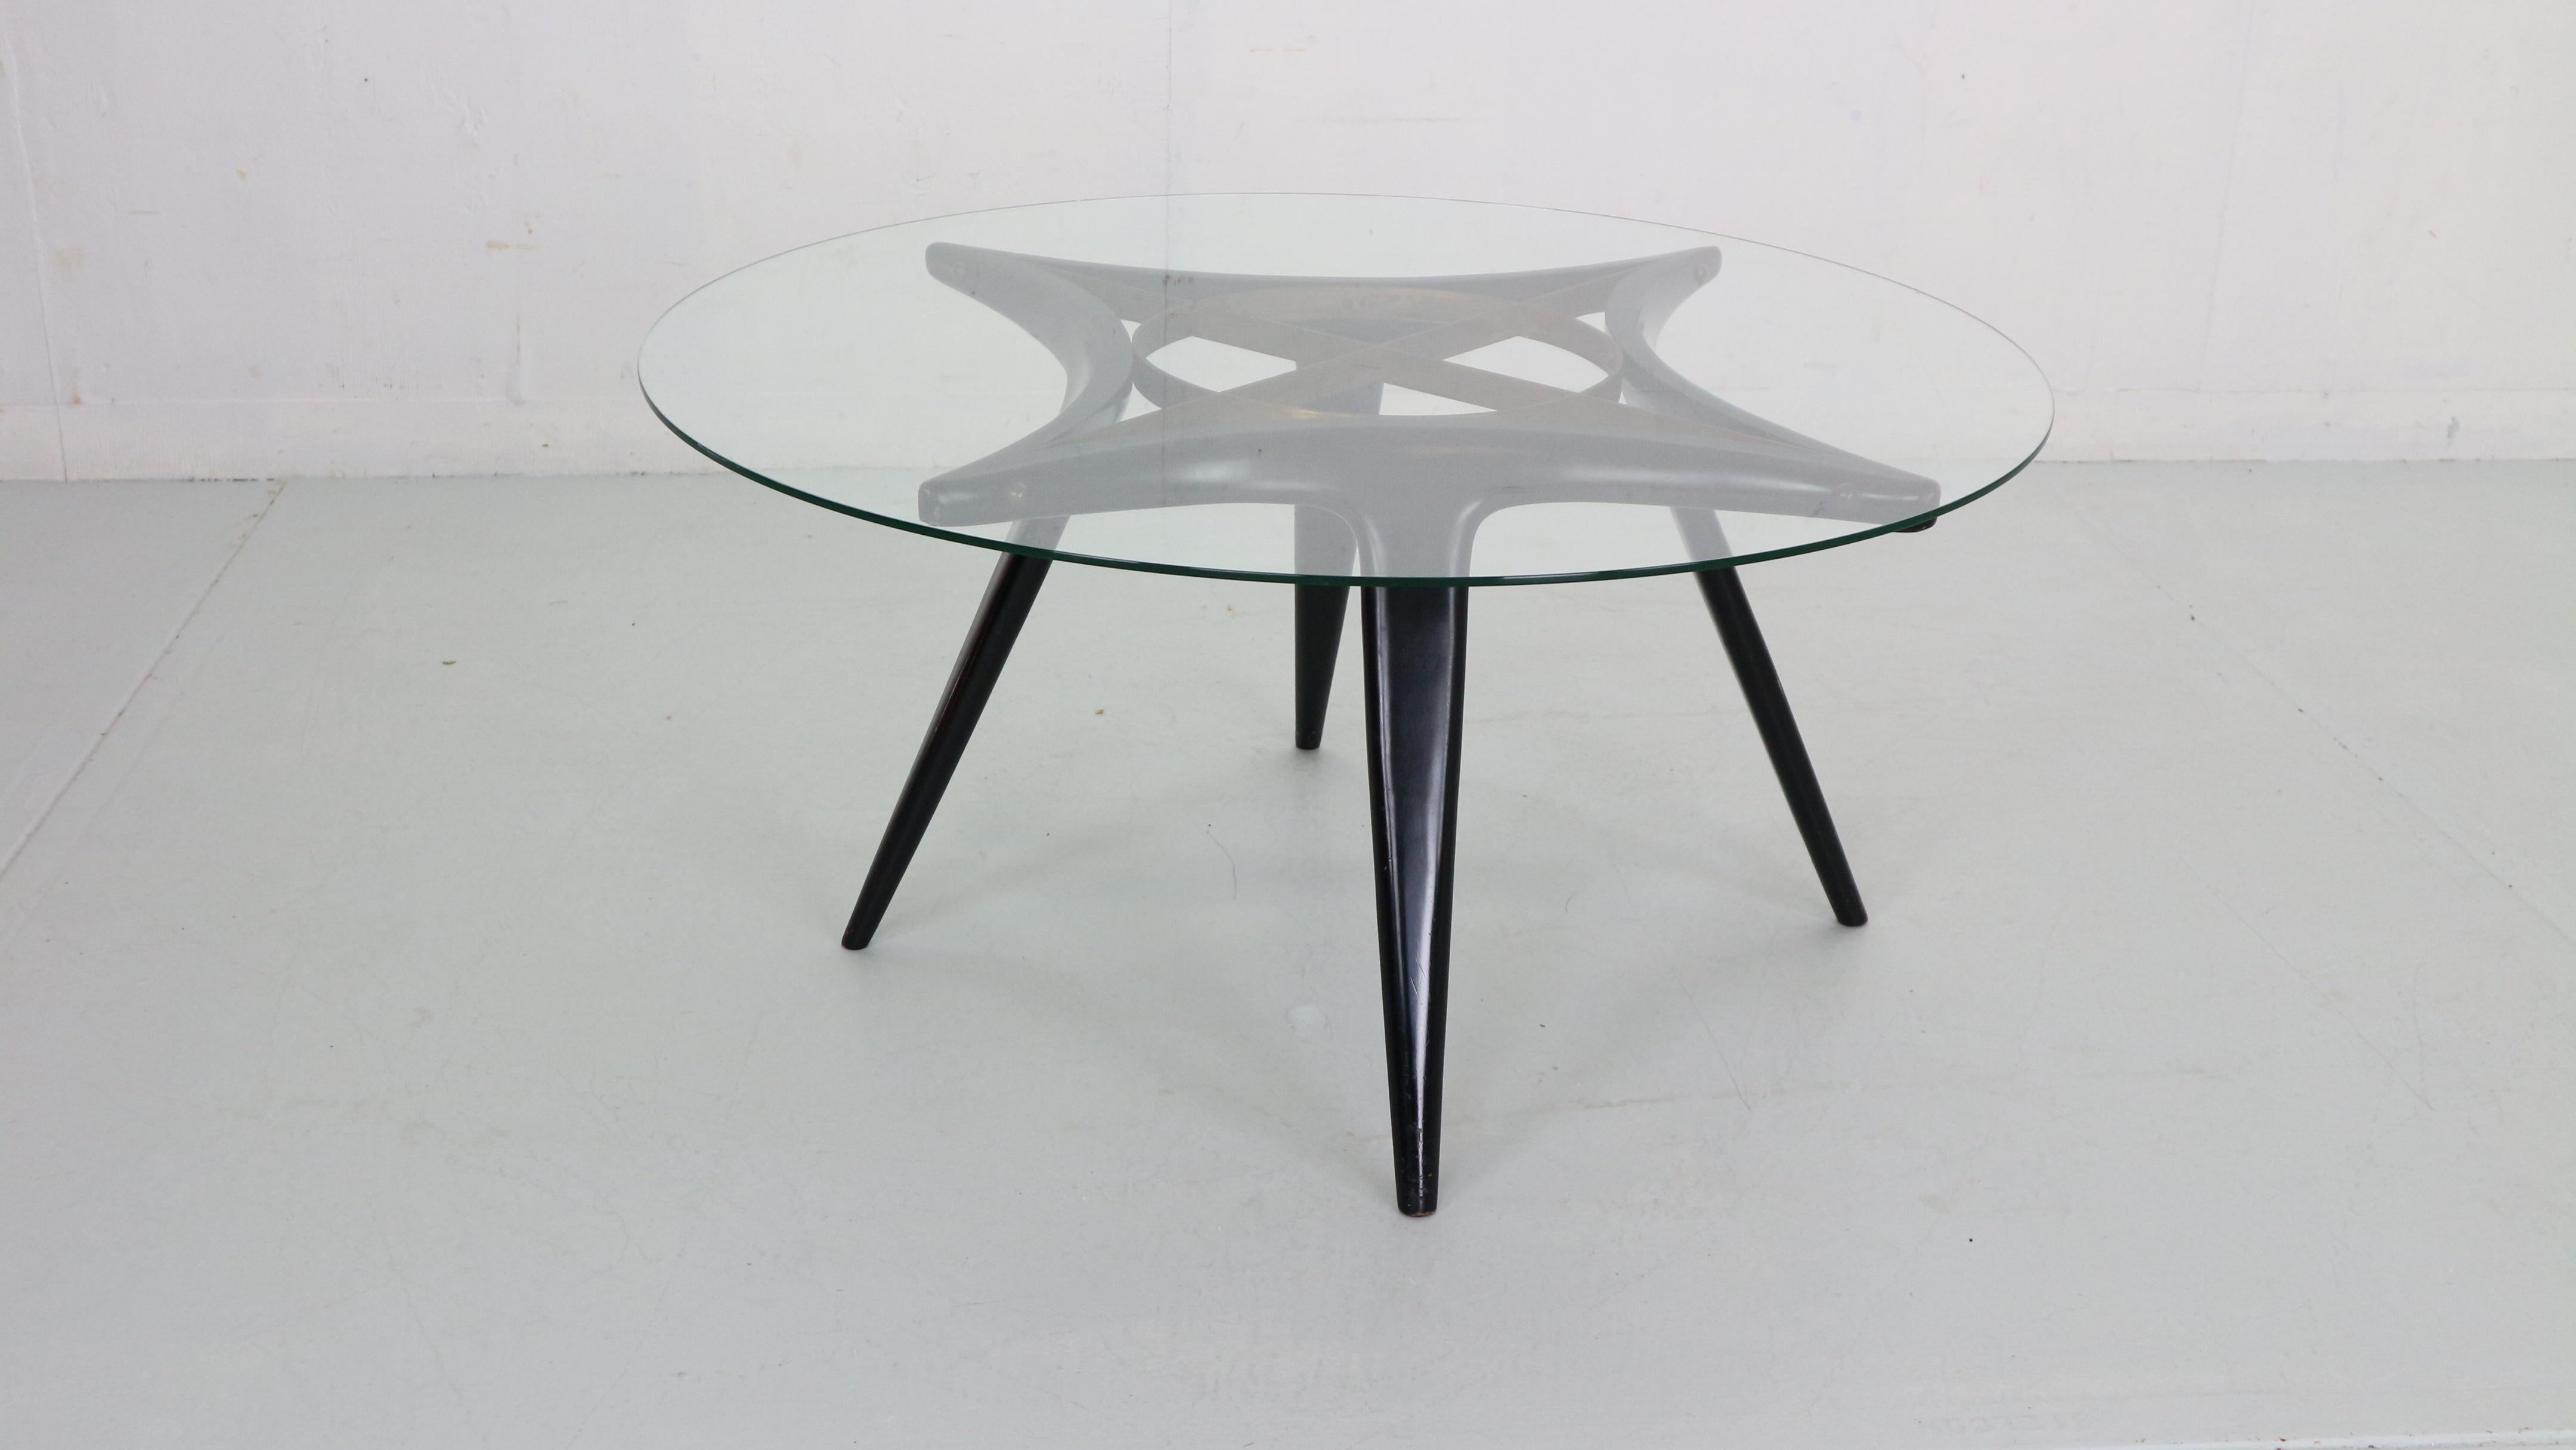 Mid-Century Modern period coffee table designed by famous Italian furniture designer Gio Ponti and manufactured by Singer& Sons in 1950s period, Italy.
Round shaped coffee table is made of solid walnut wood- lacquered black, brass shaped details